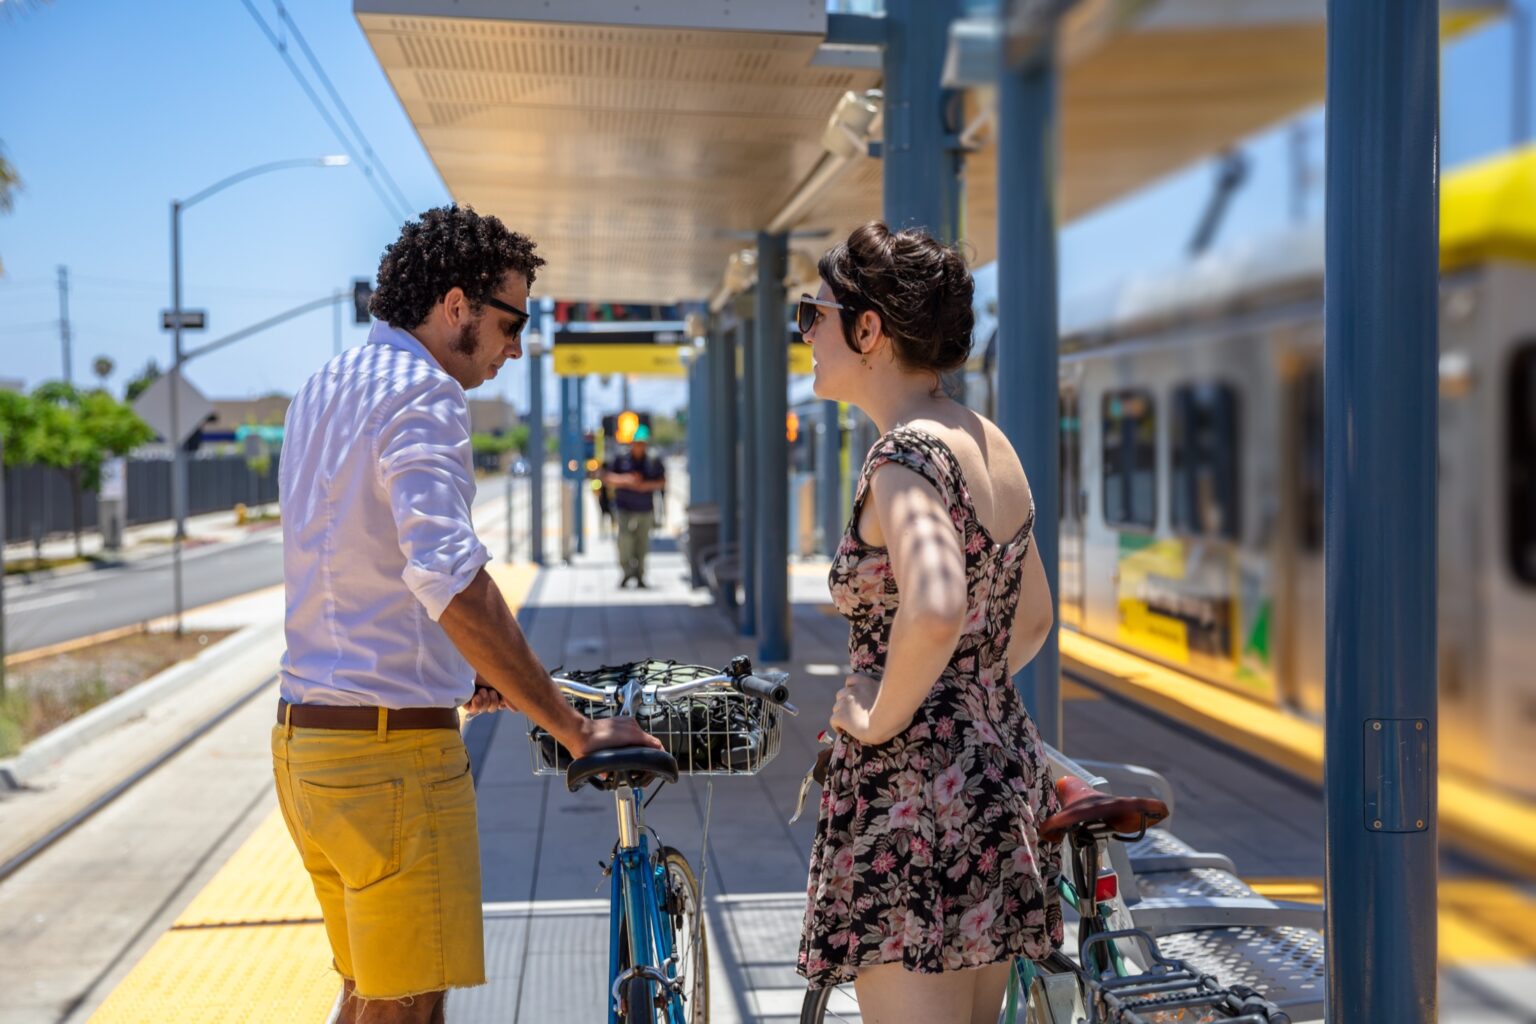 Two people talking at a rail station with bikes